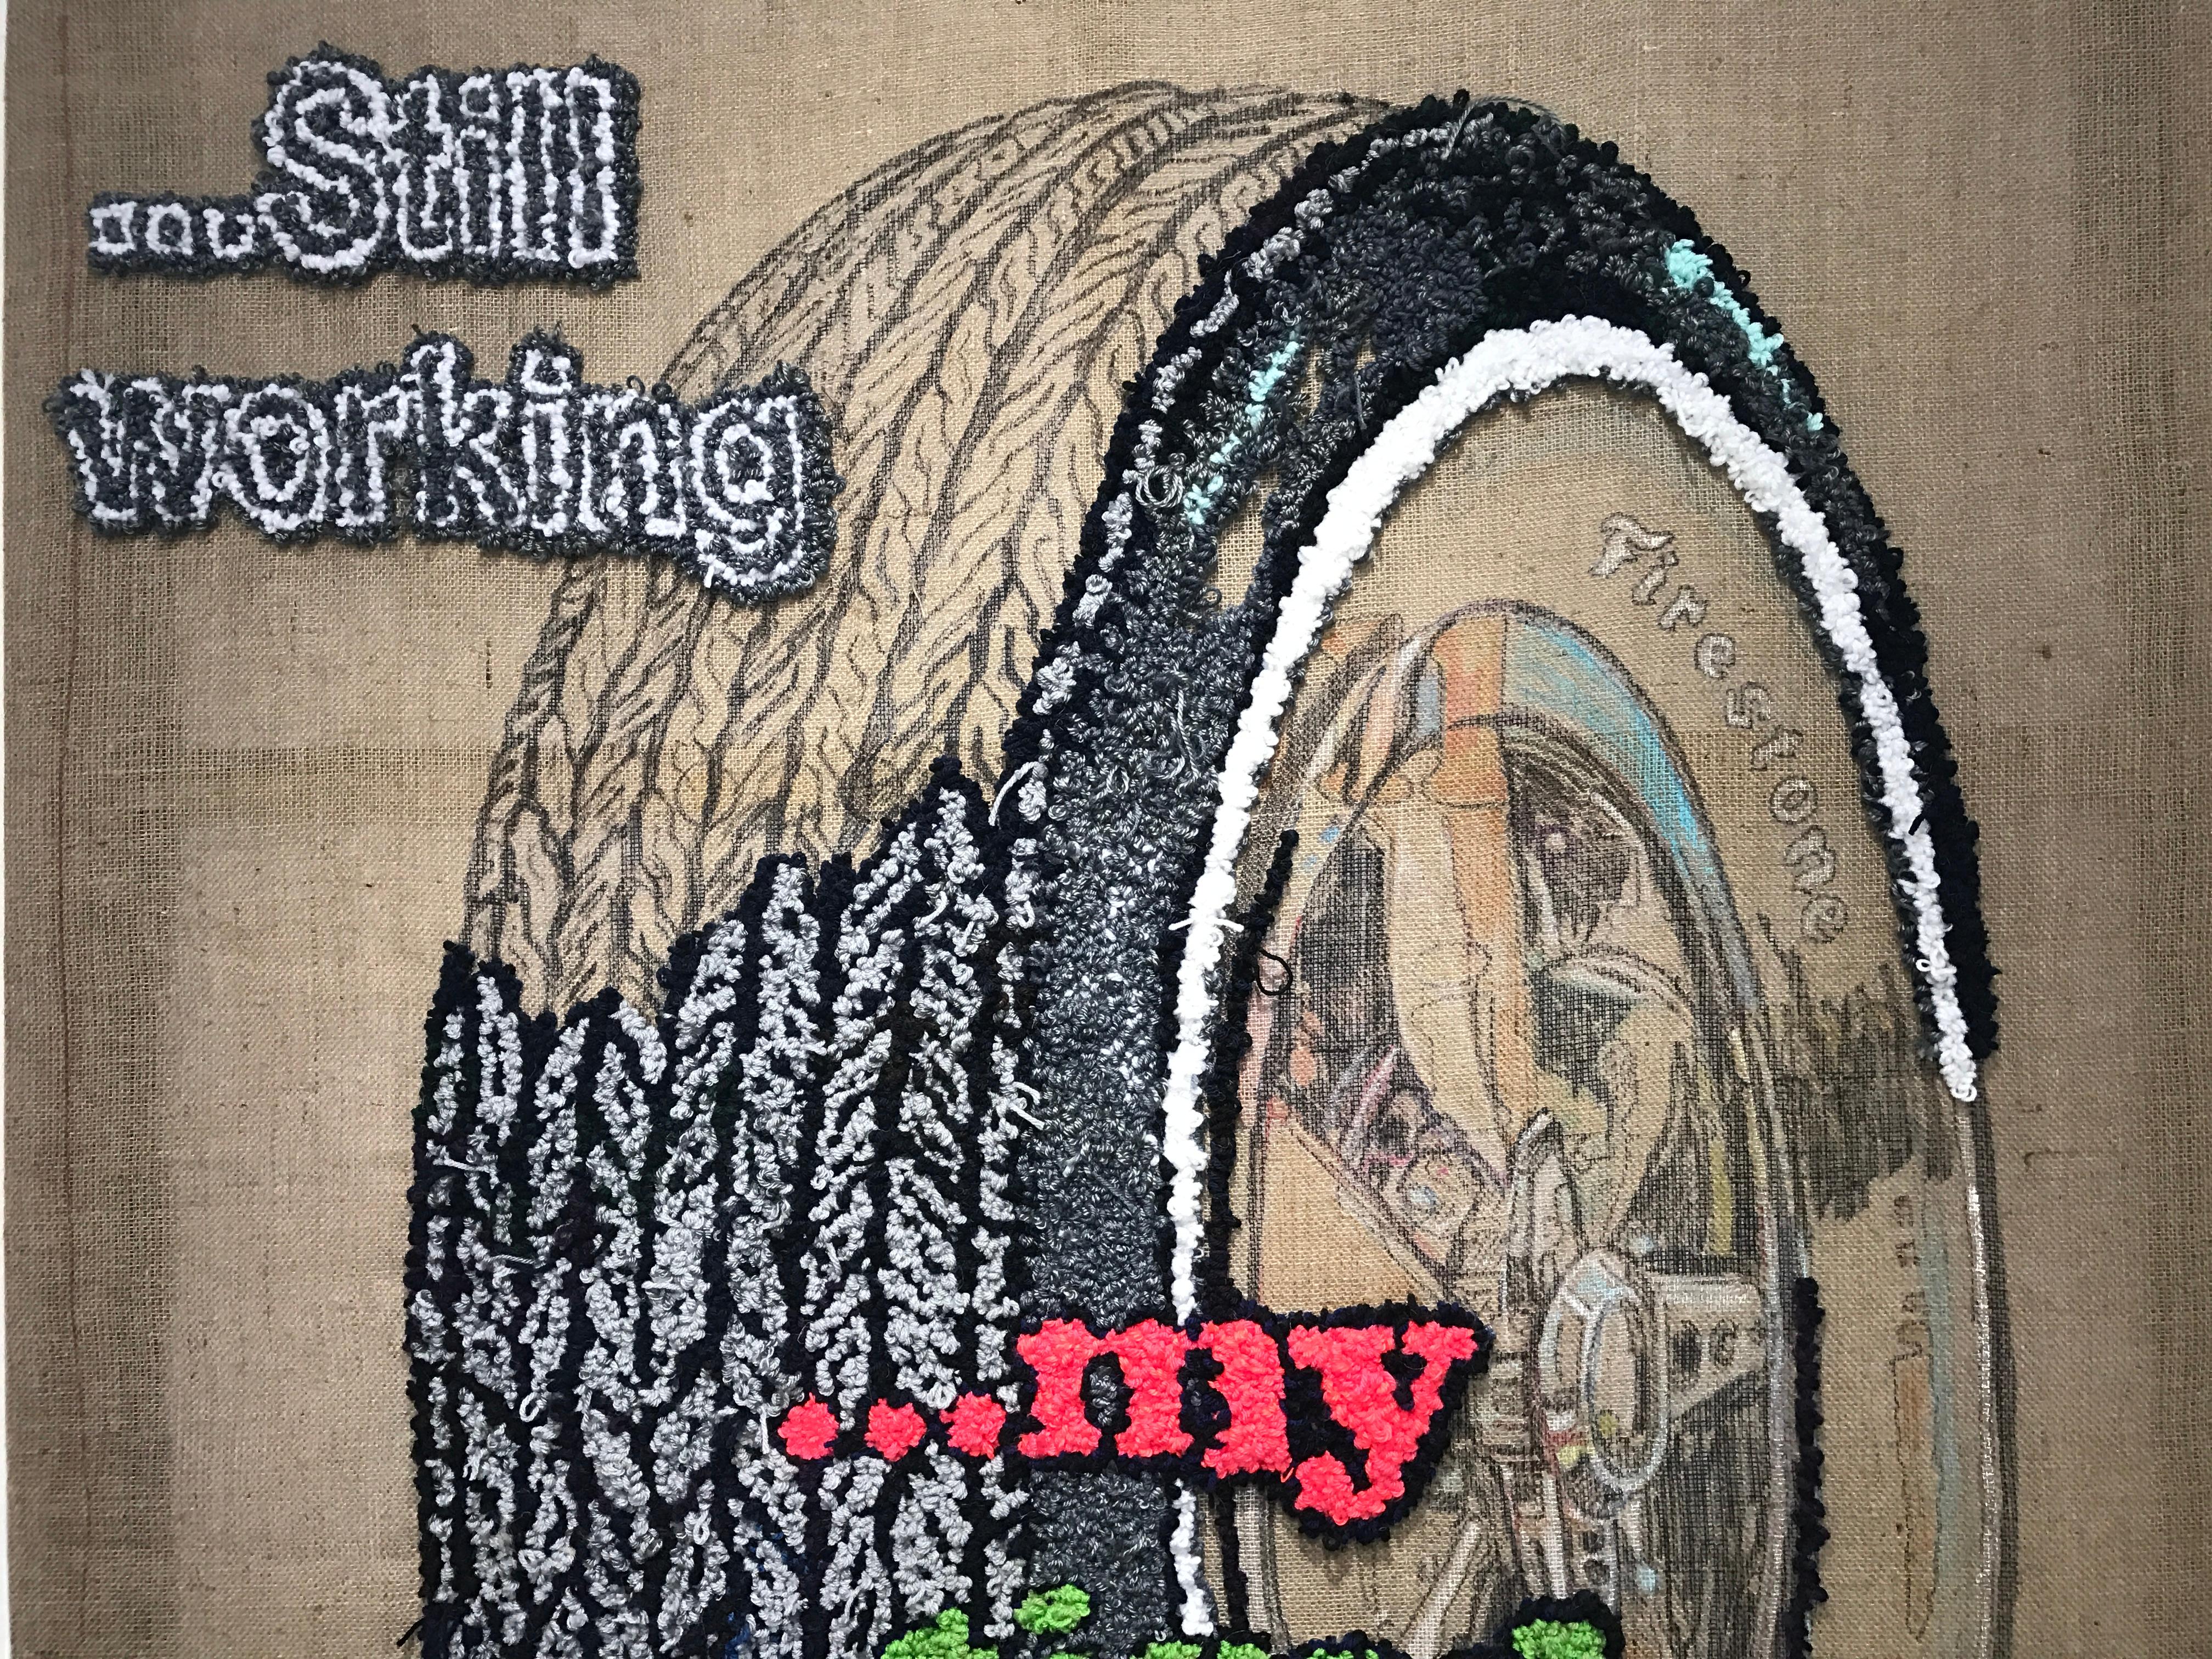 This text based fiber work by New York artist, David Kramer incorporates elements of crafting known as hook rug, which are tooled over hand drawn elements on the burlap. A Firestone tire is the main visual subject, taking on the satirical wit that